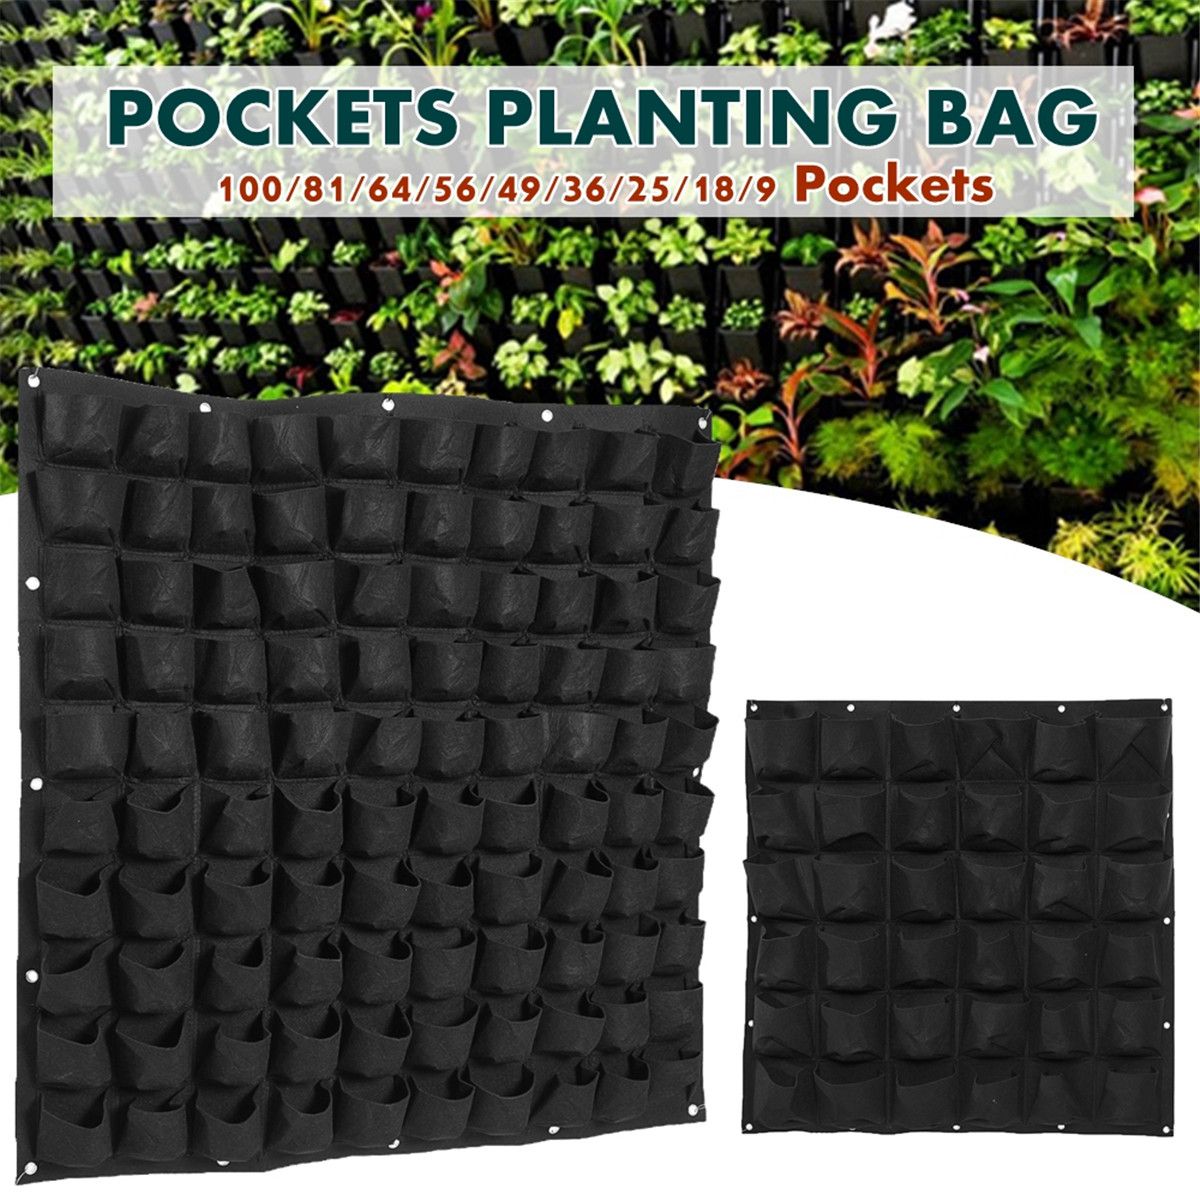 100816456493625189-Pockets-Vertical-Planting-Bags-Wall-Hanging-Planter-Bags-Flower-Growing-Container-1728923